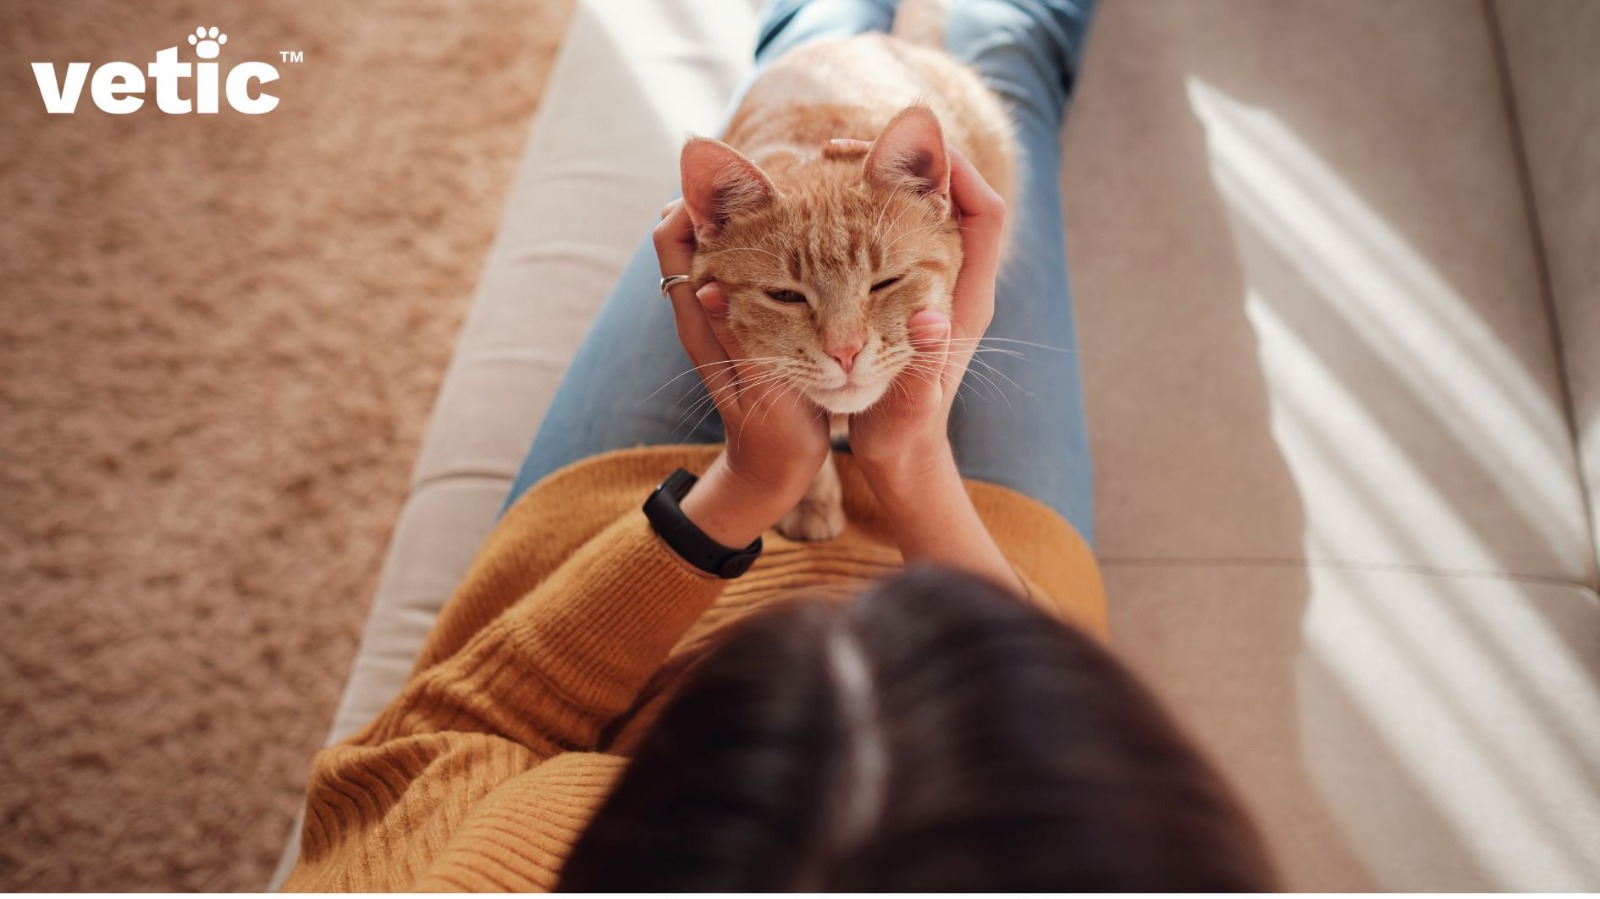 A ginger cat sitting on a woman's lap who's wearing a pair of blue jeans and ochre sweater. the photo is taken from the top so only the top of the woman's head is visible. she has black hair with a right part. She is holding the cat's face with both hands and the cat is enjoying this display of affection. A cat in heat will often demand and enjoy extra attention like this.